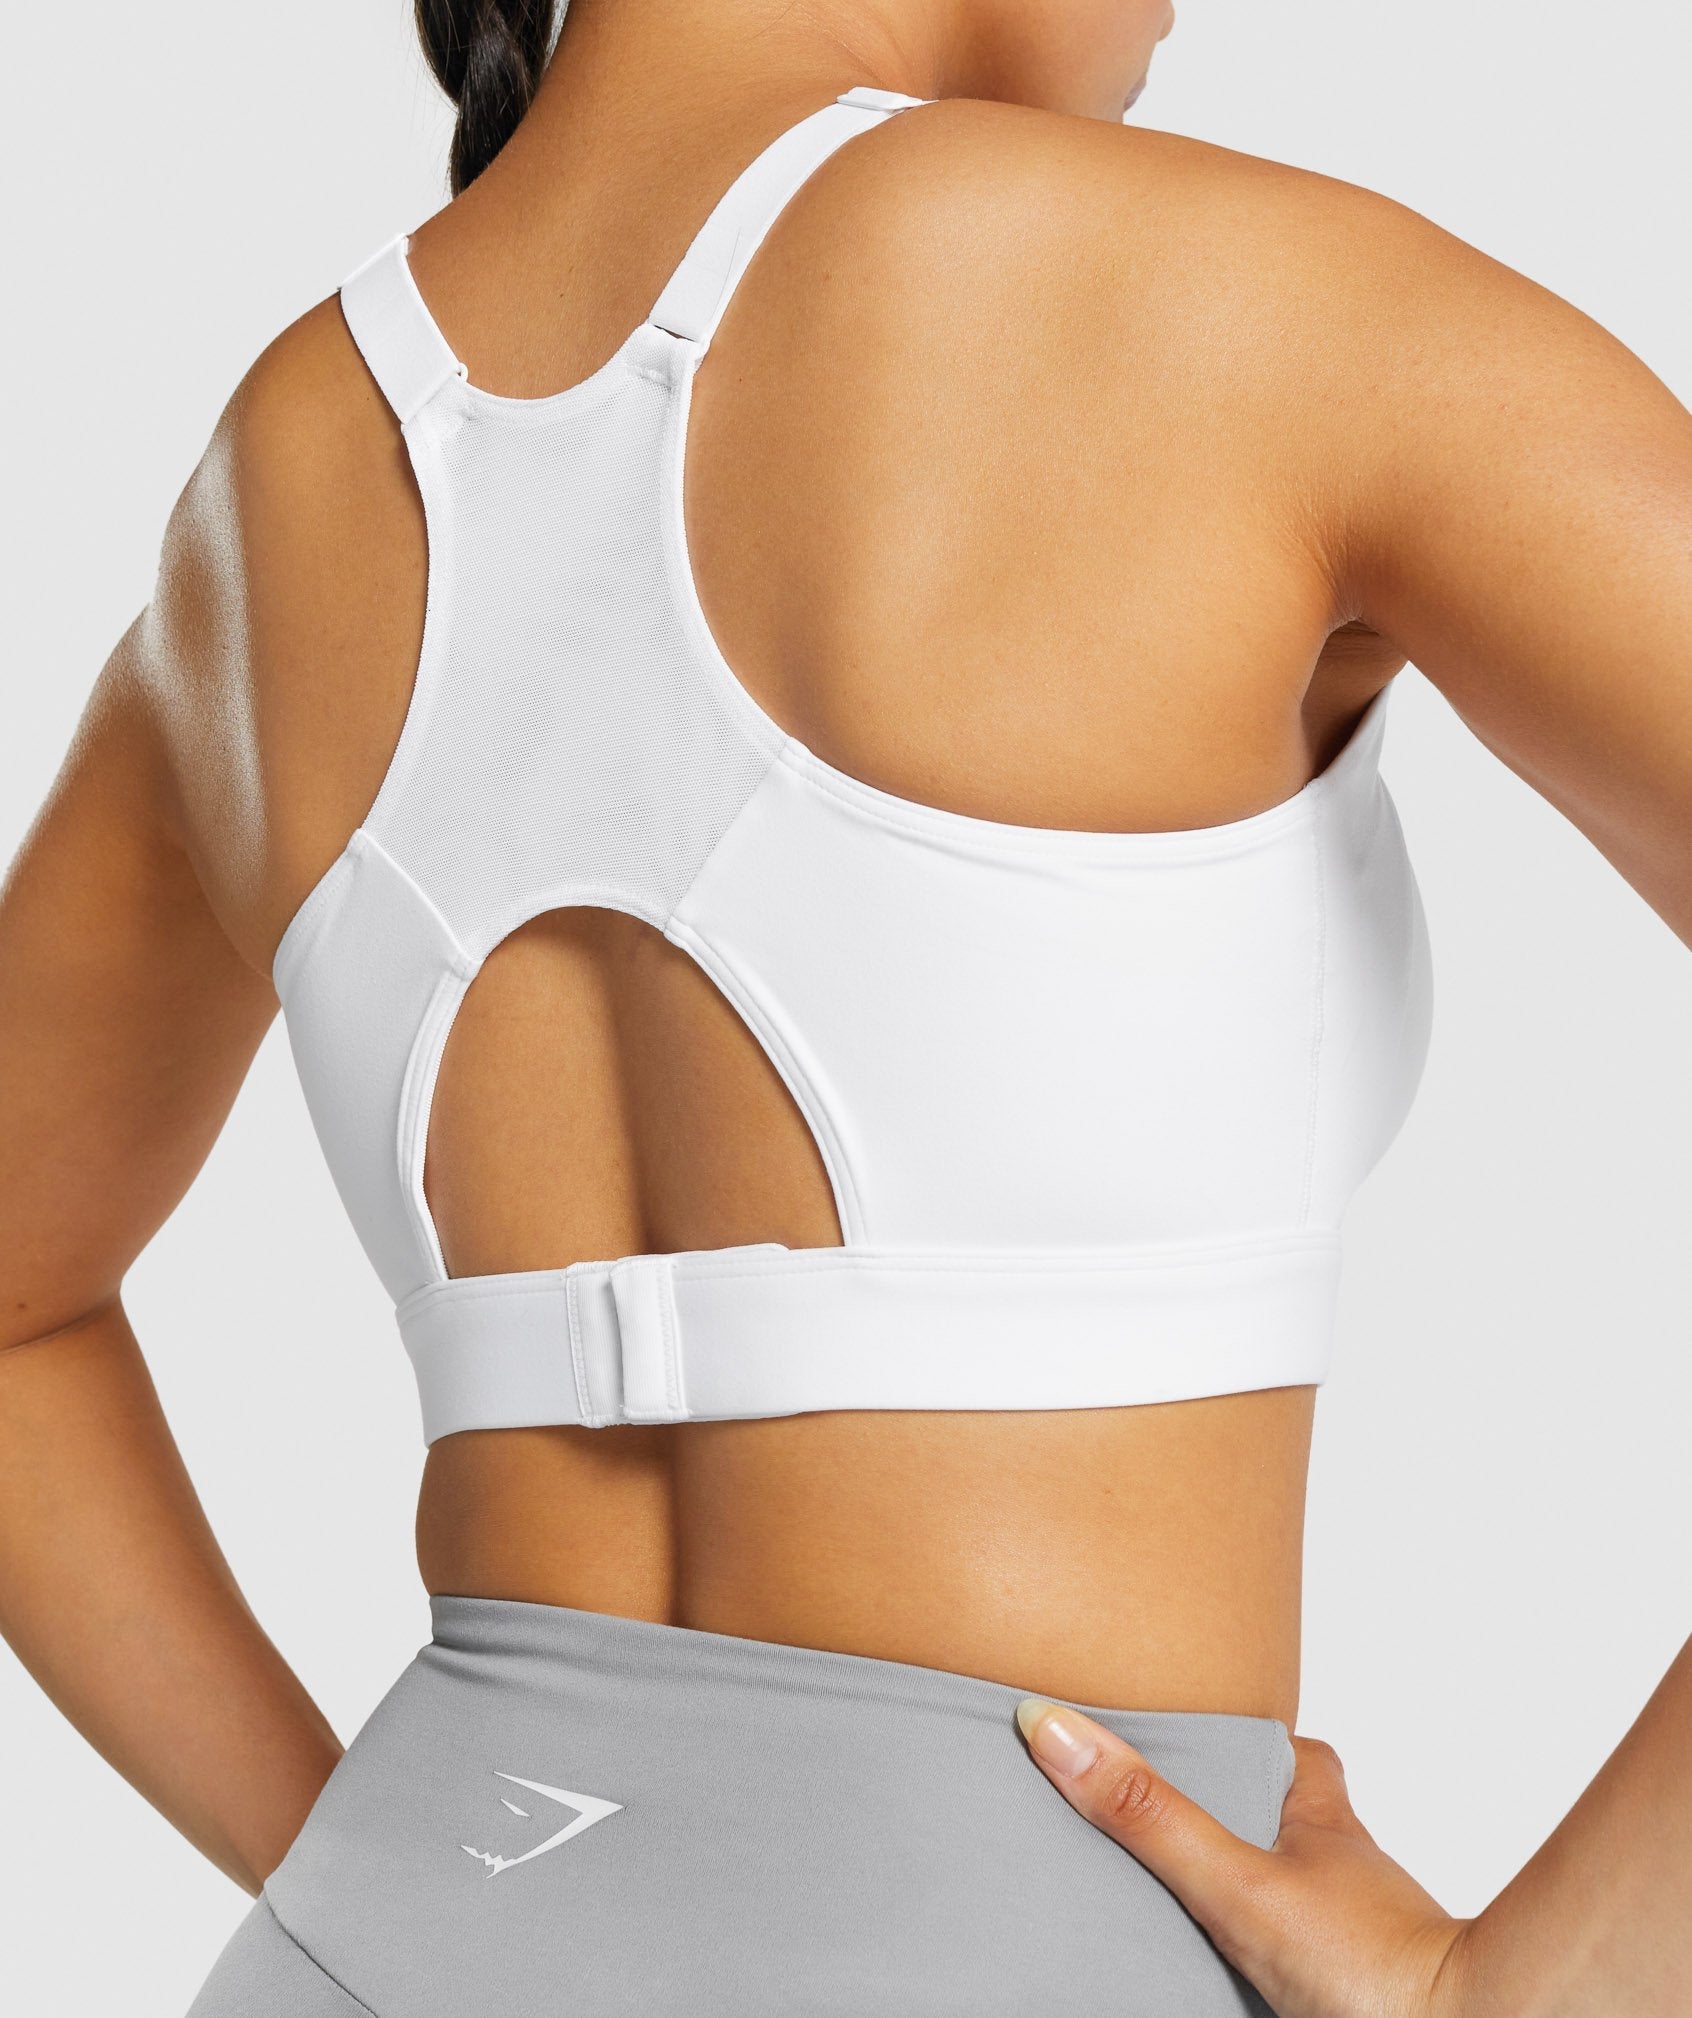 I almost bought a sports bra from gymshark but I never seen white